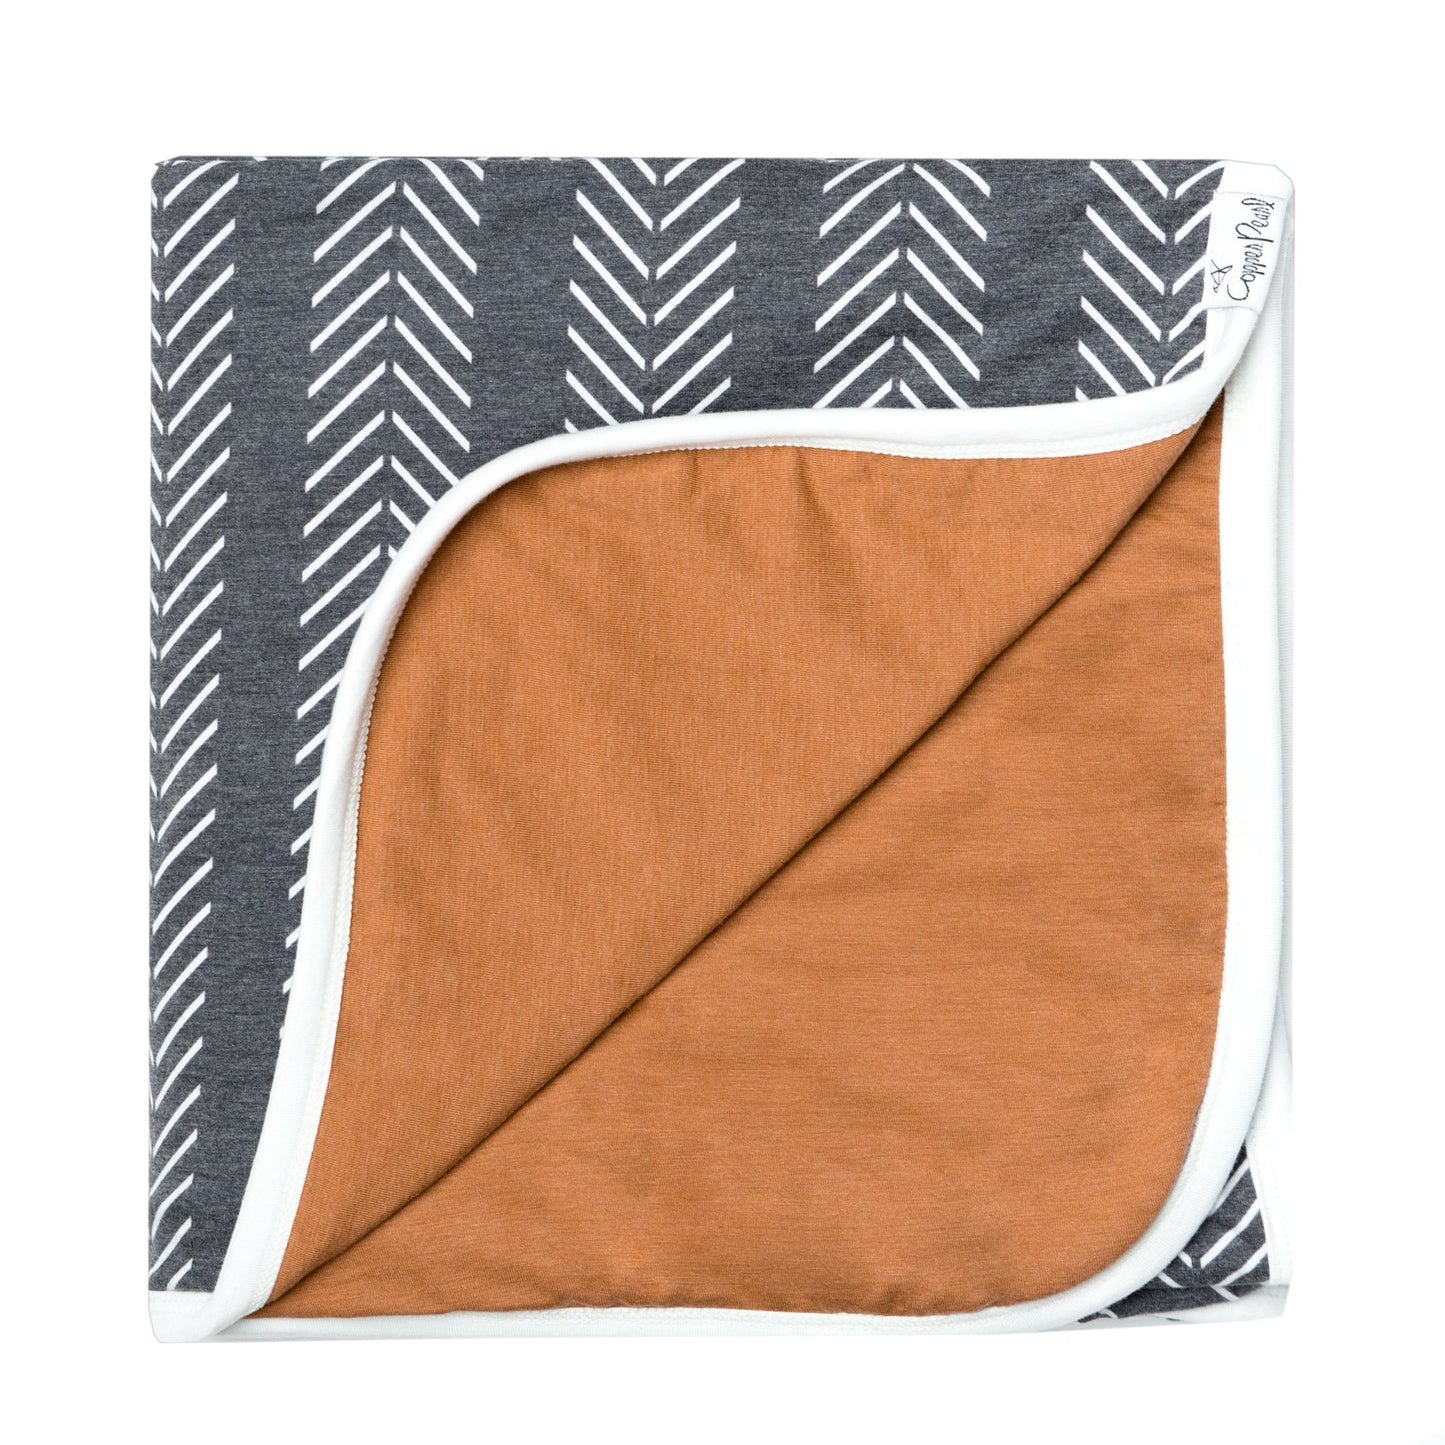 Copper Pearl 3 Layer Stretchy Quilt in 5 Colors